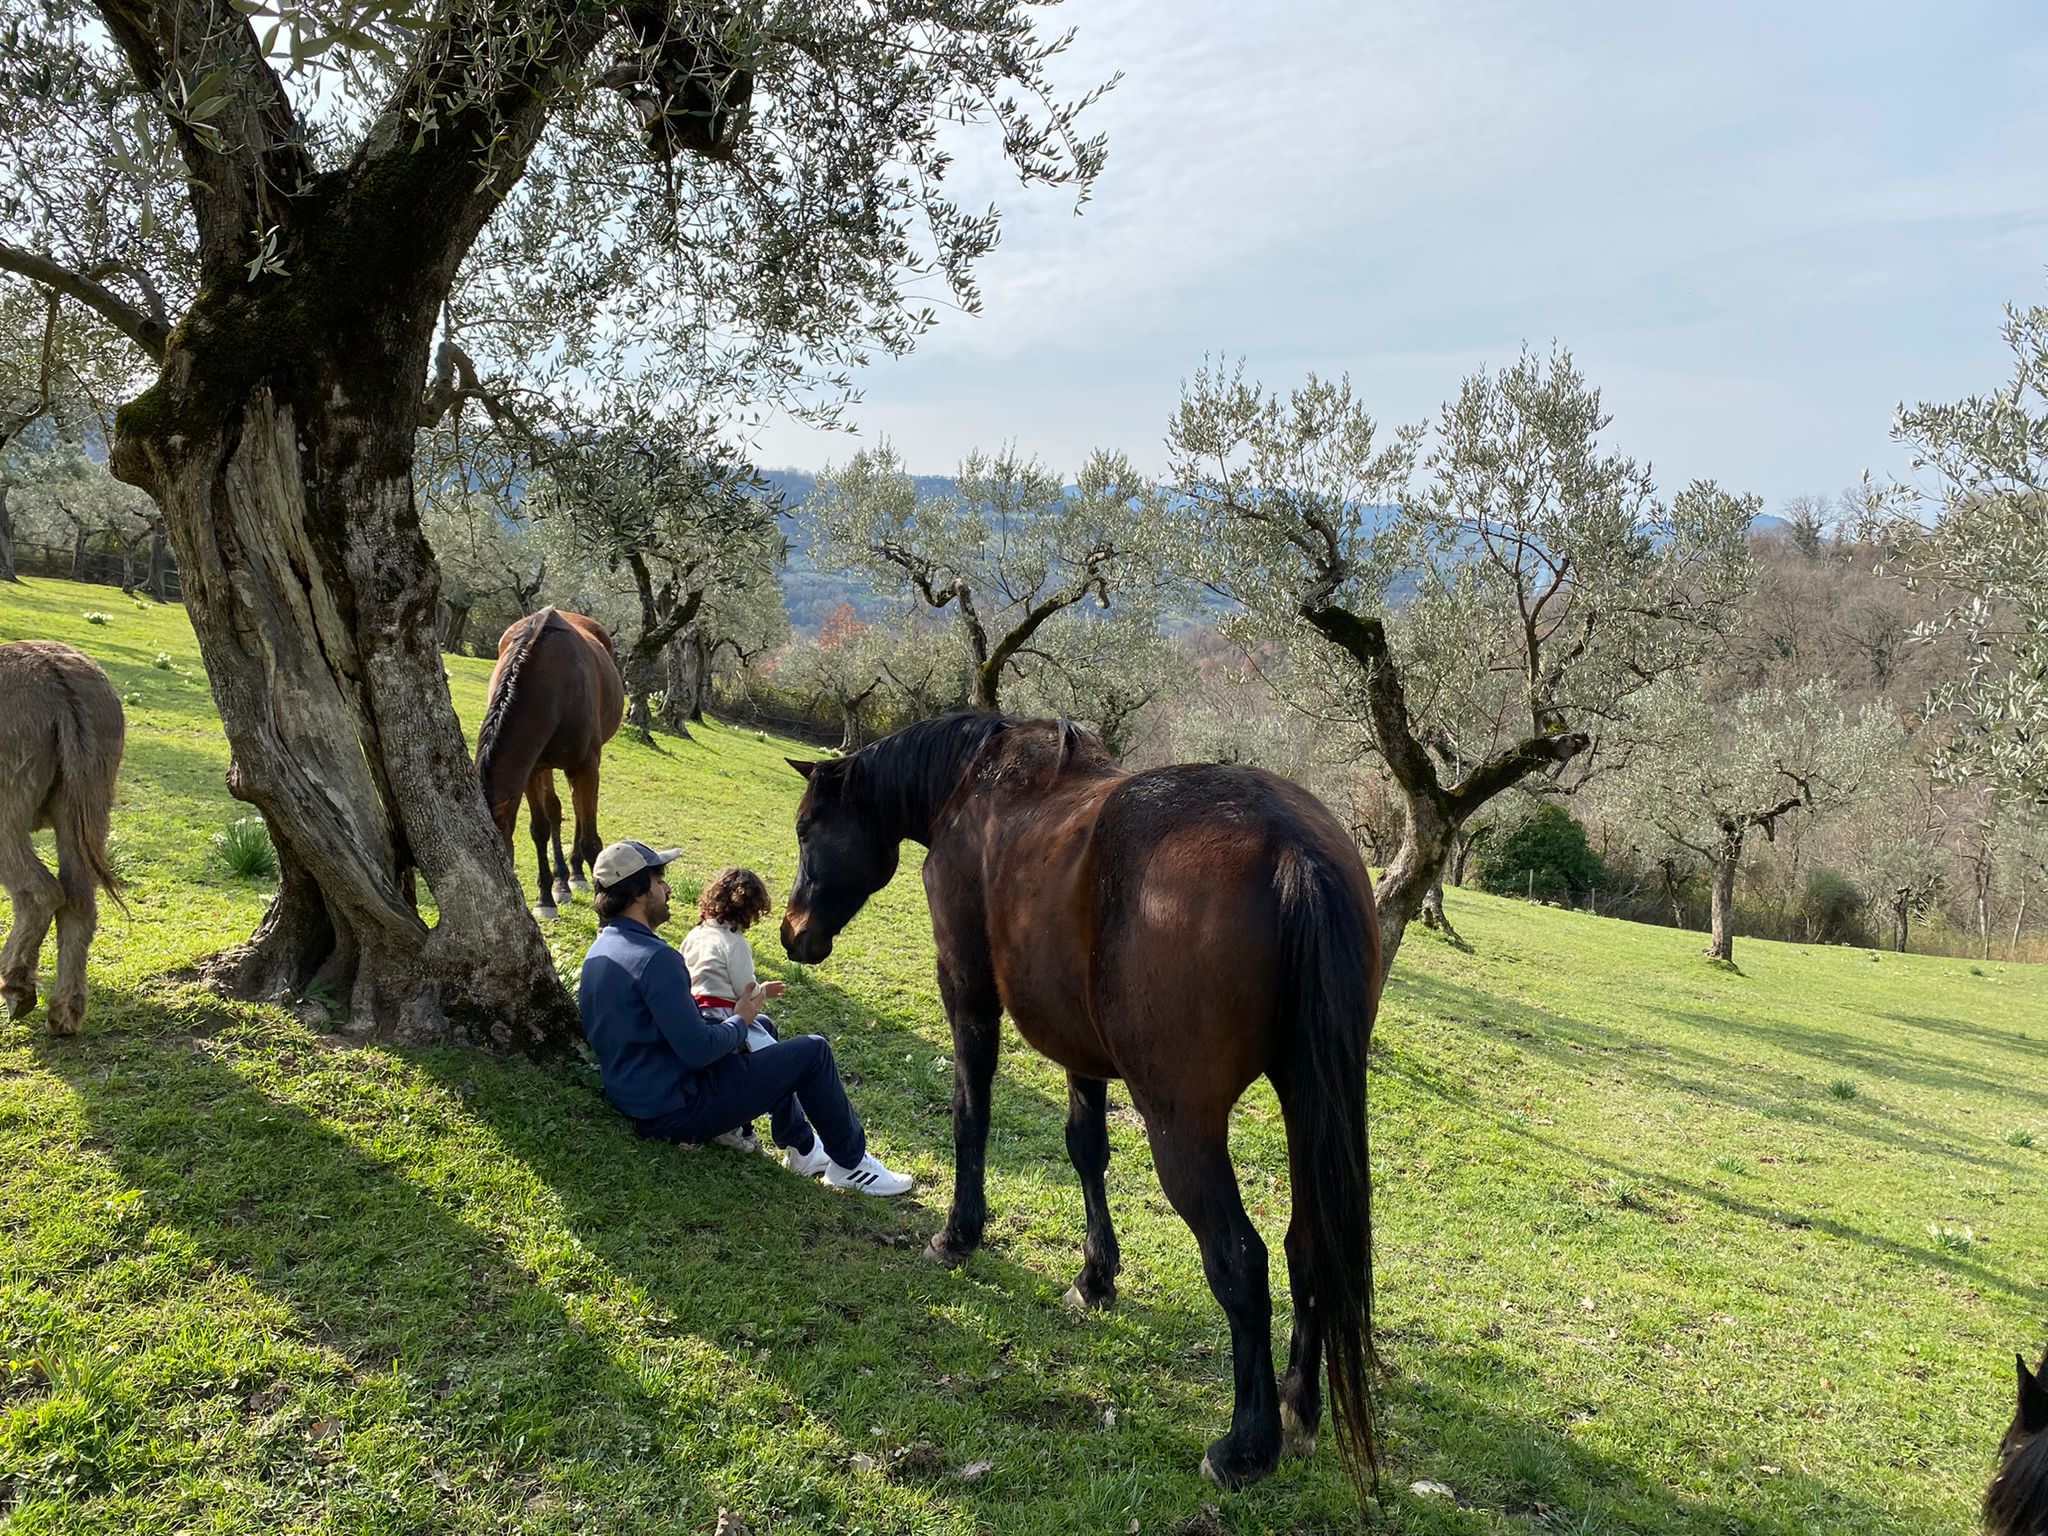 Farm lunch in an ancient olive grove